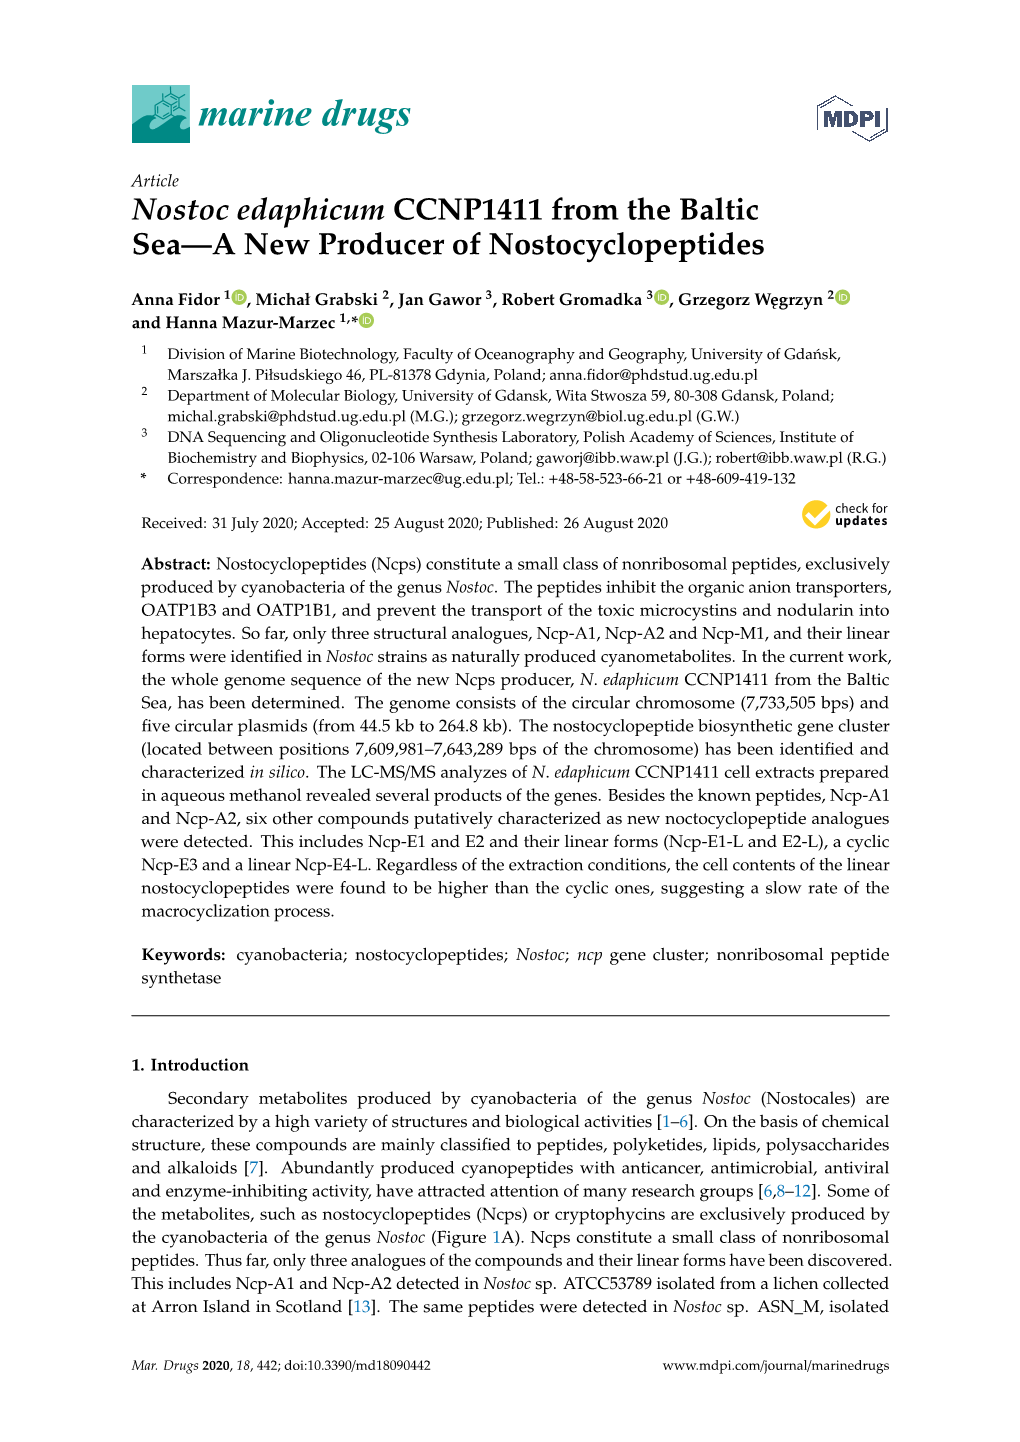 Nostoc Edaphicum CCNP1411 from the Baltic Sea—A New Producer of Nostocyclopeptides